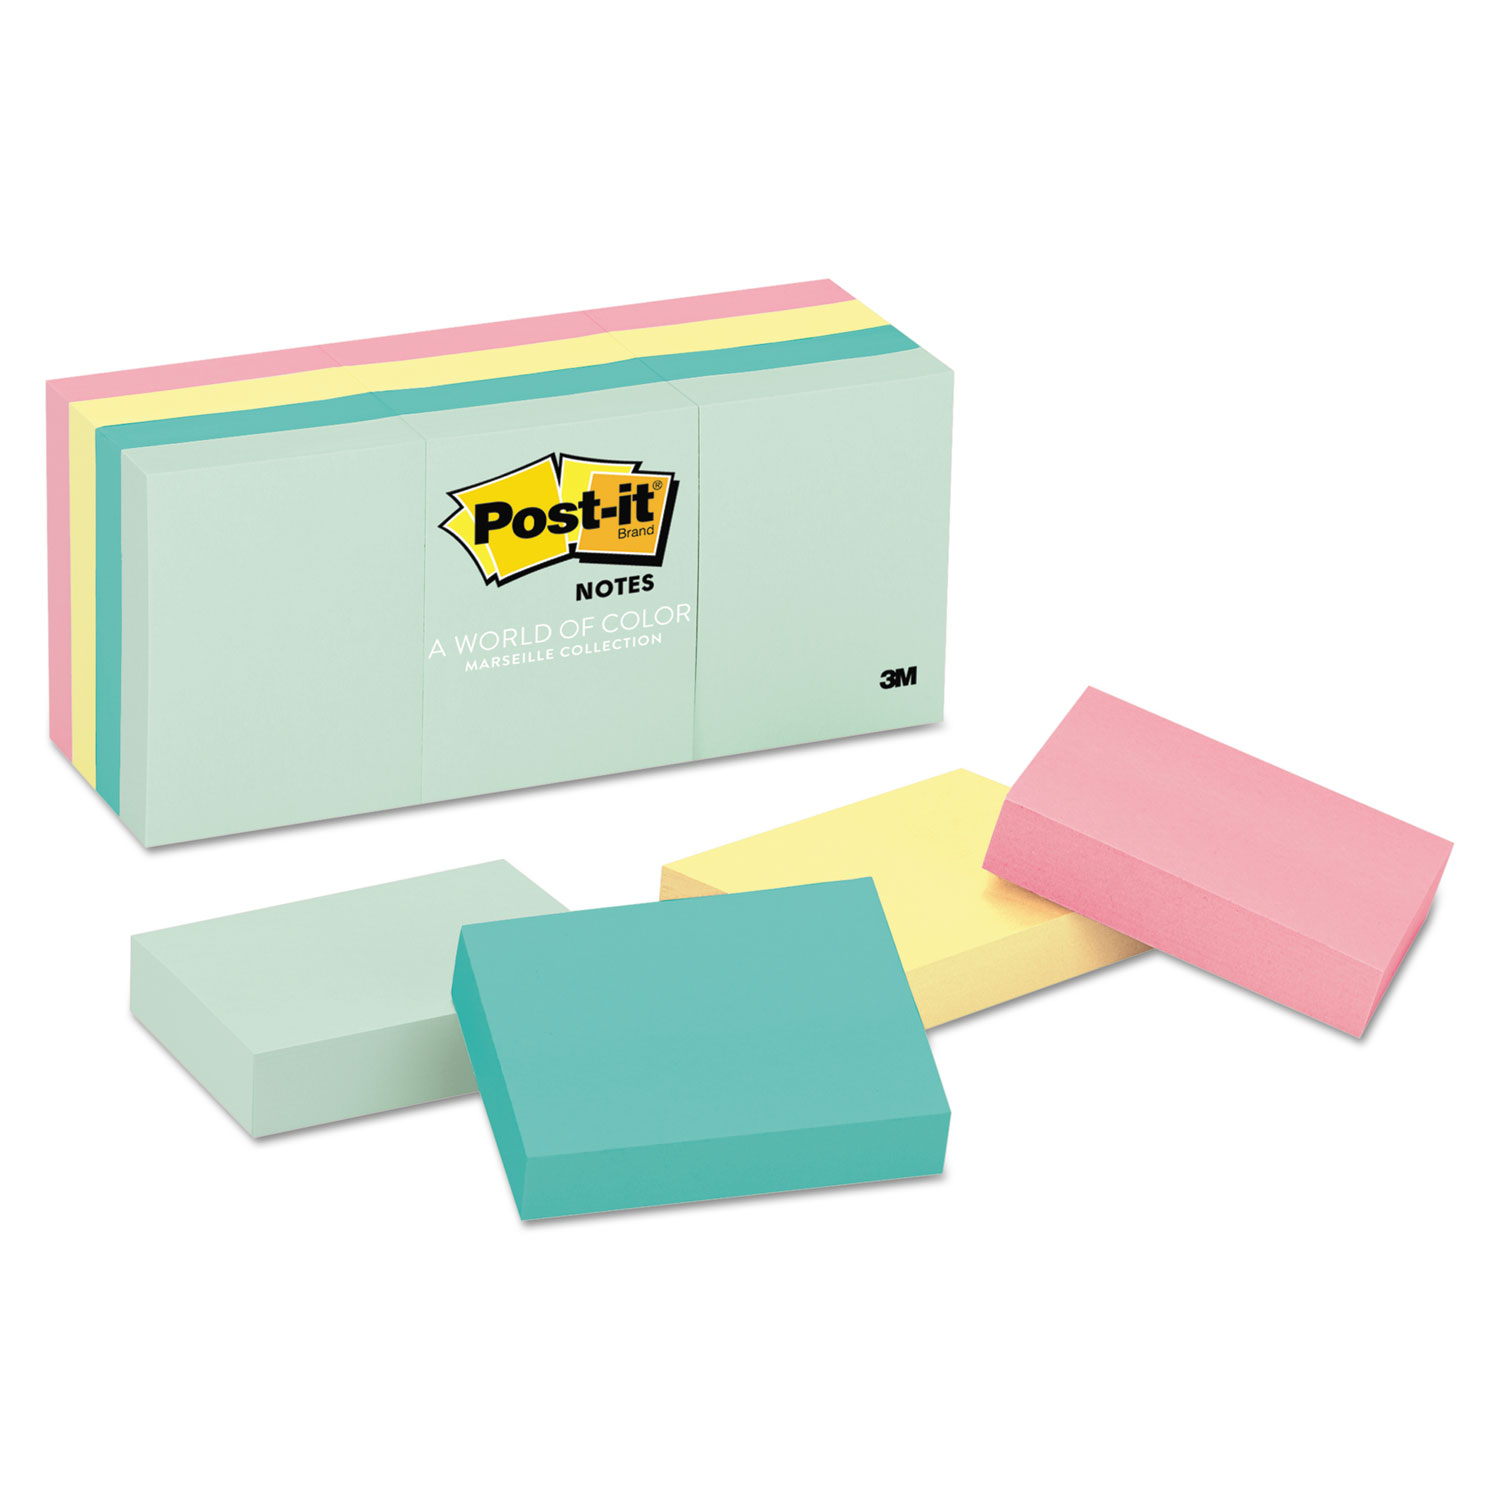  Post-it Notes 653-AST Original Pads in Marseille Colors, 1 3/8 x 1 7/8, 100-Sheet, 12/Pack (MMM653AST) 